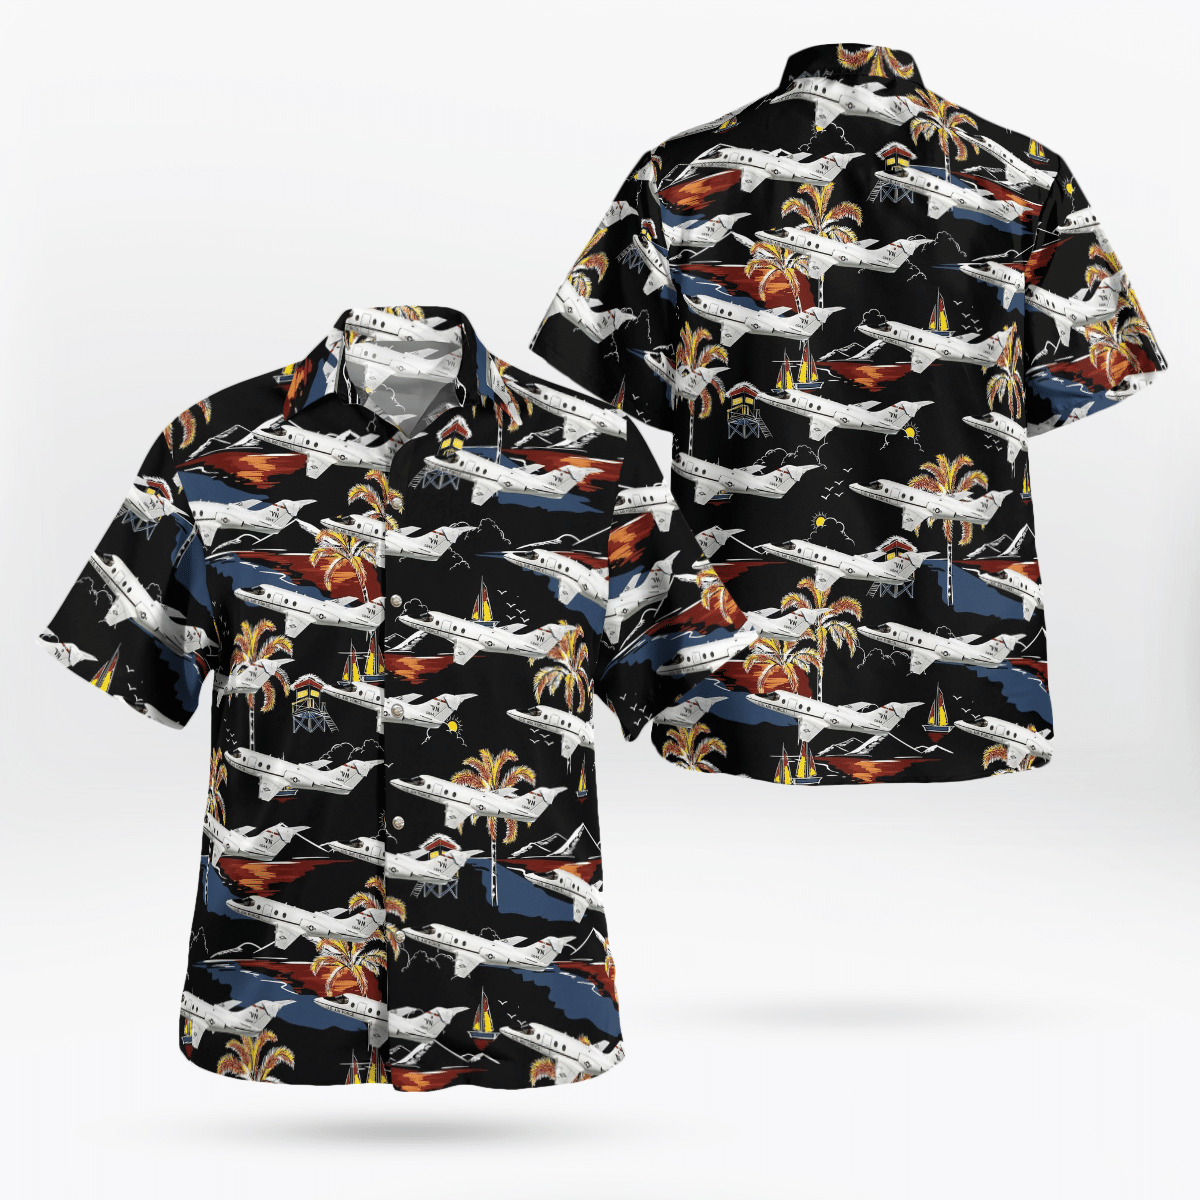 Consider getting these Hawaiian Shirt for your friends 355